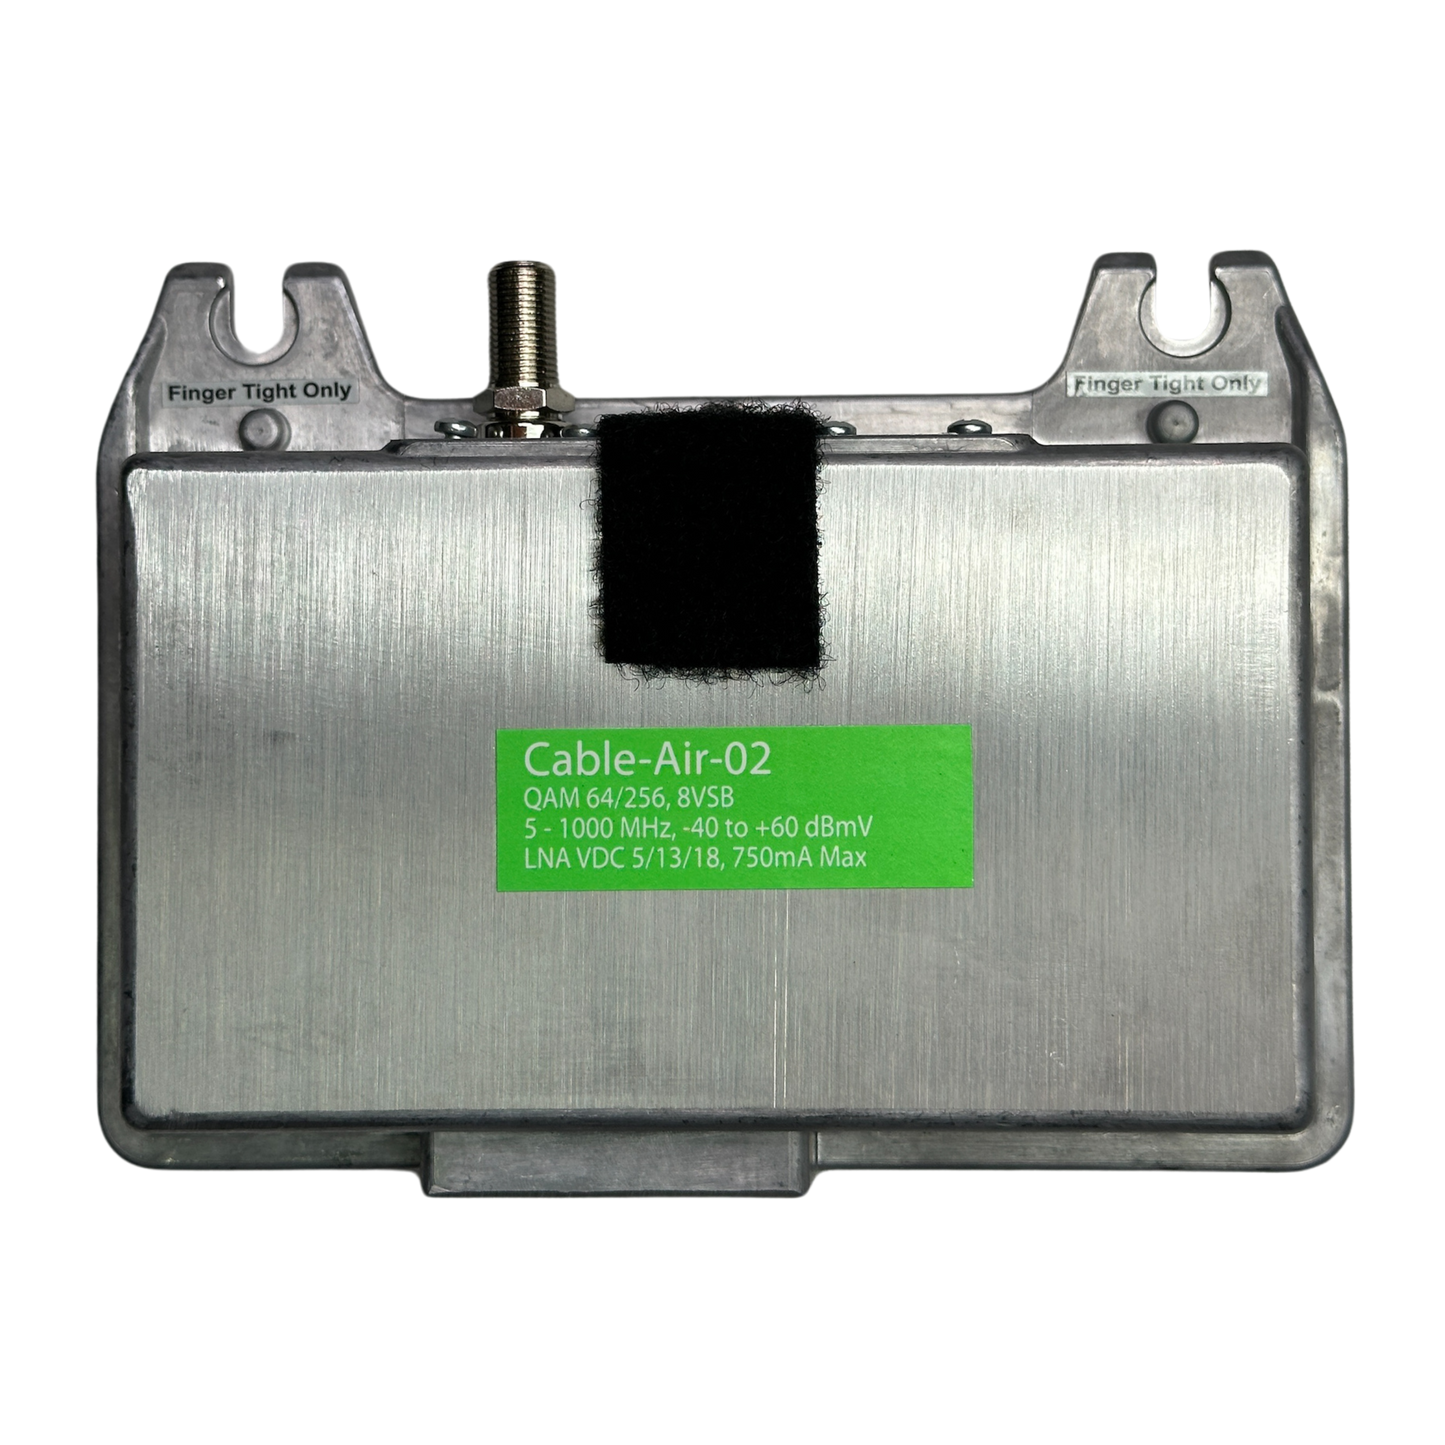 Digital Cable-Air Module for XR-3